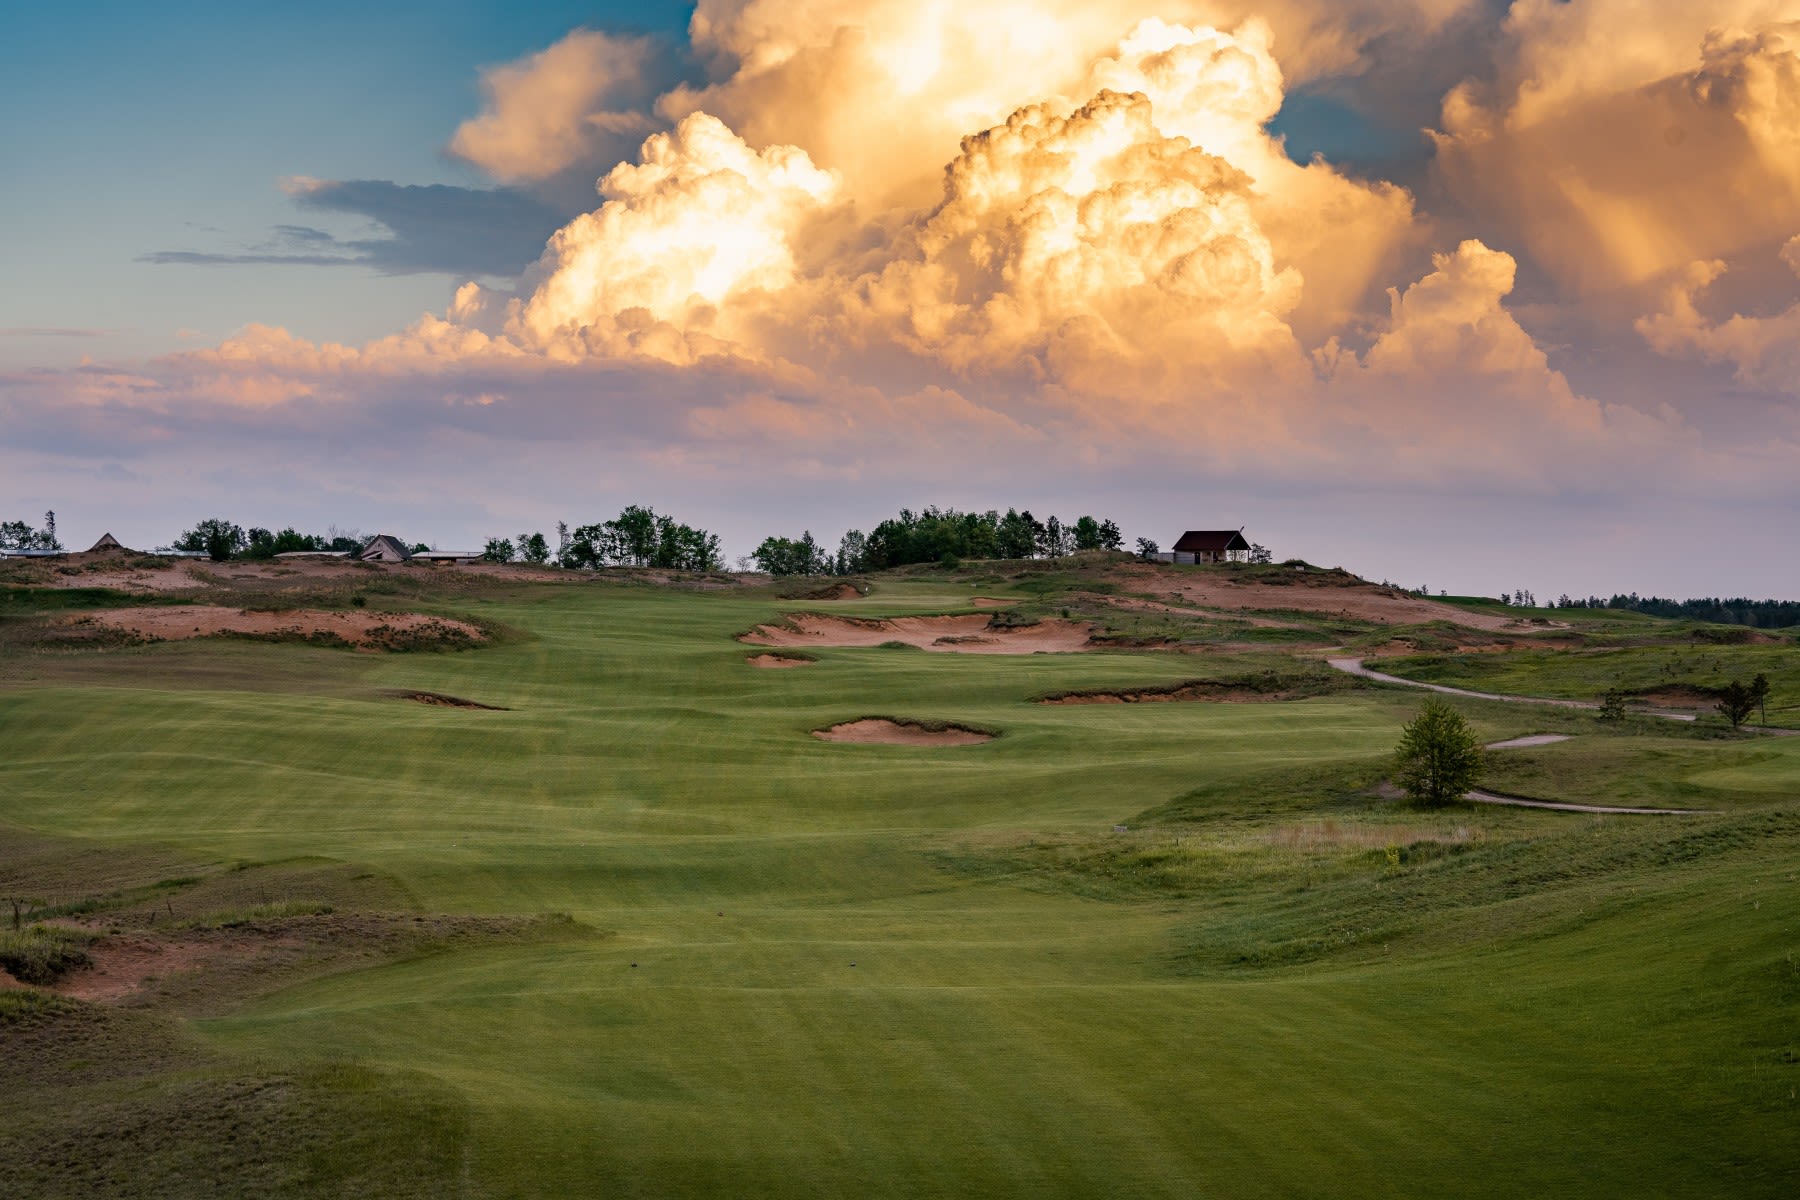 The finishing hole at Sand Valley. (Brandon Carter)